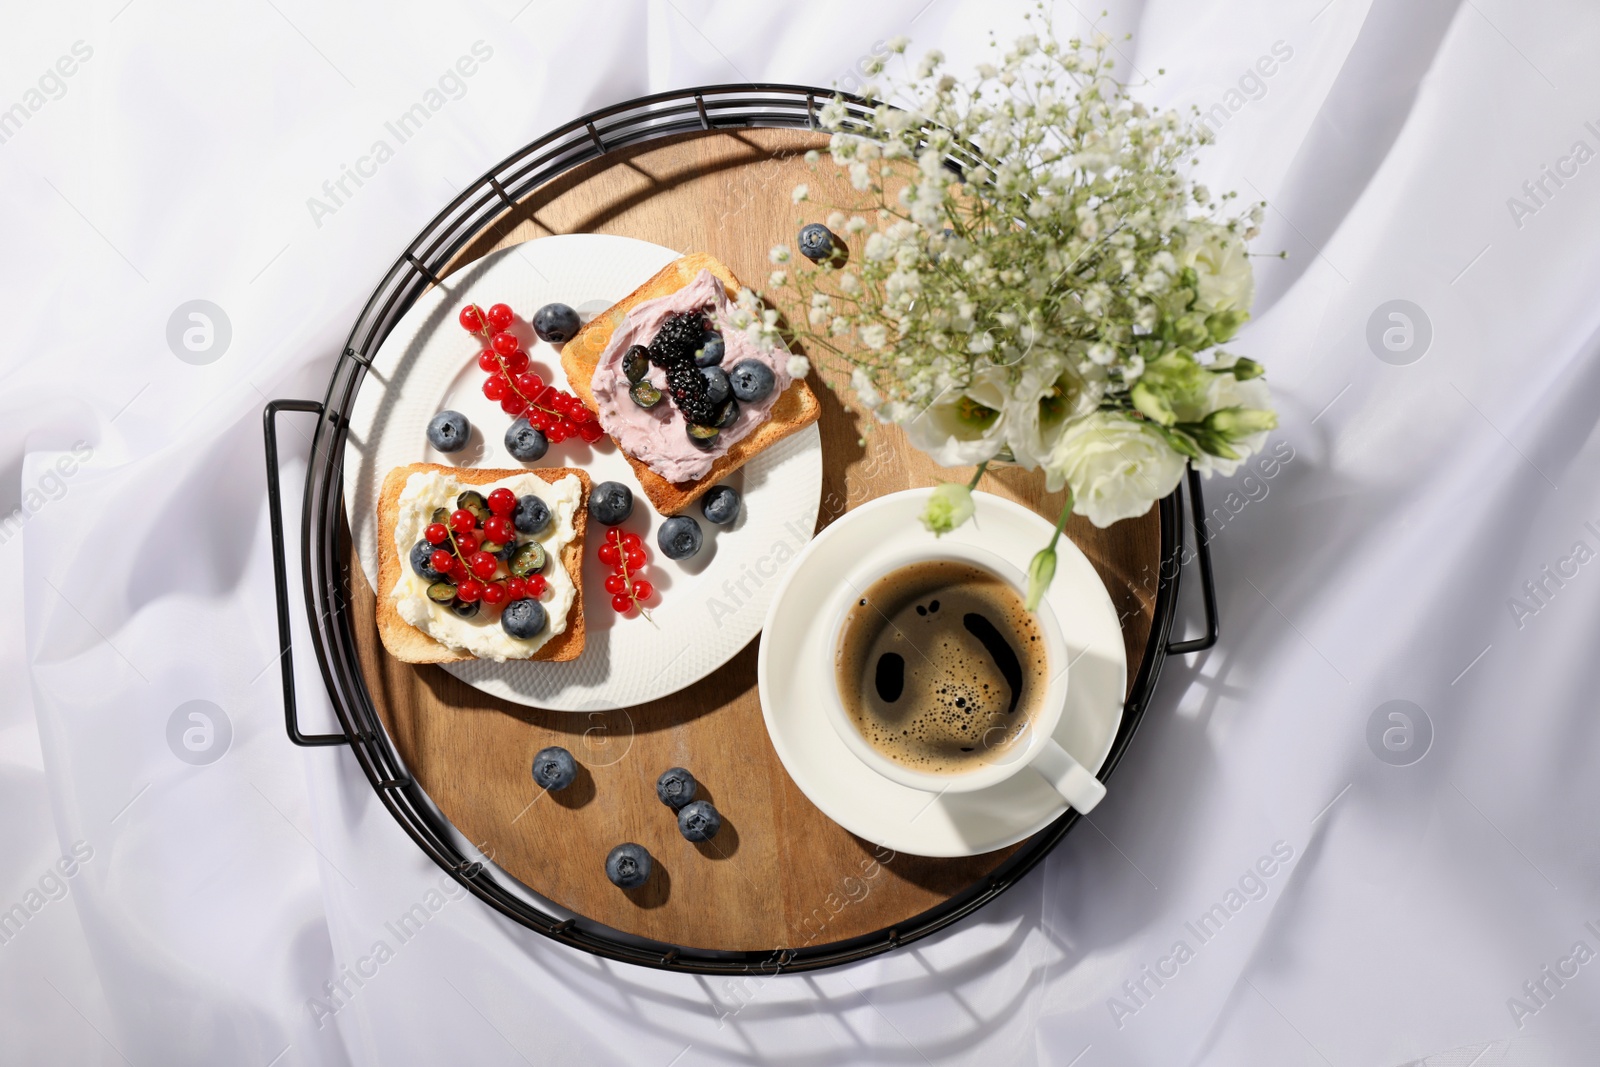 Photo of Tray with cup of coffee, cream cheese sandwiches and flowers on white fabric, top view